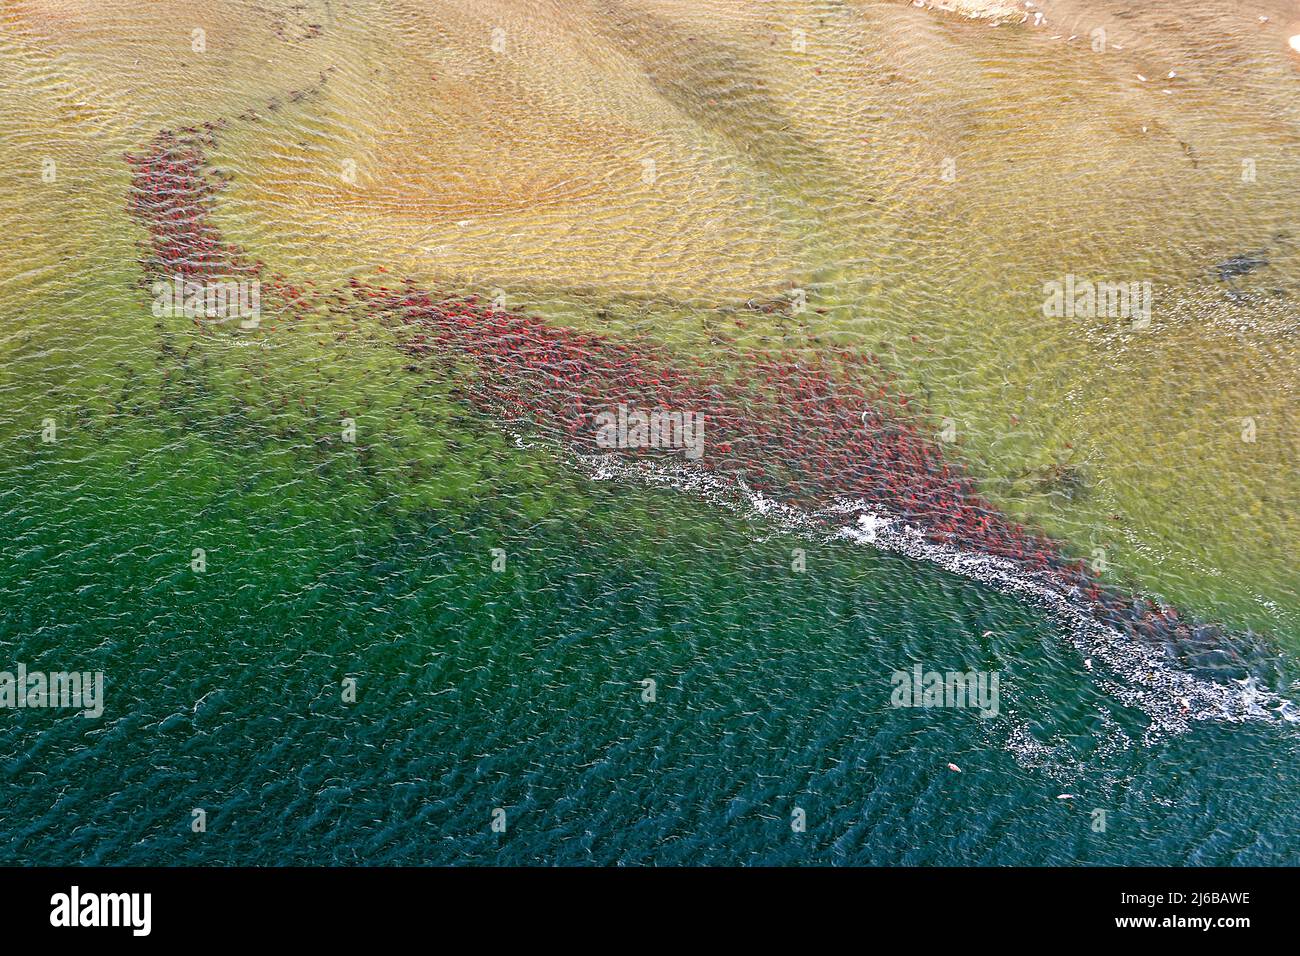 Aerial view, migration of Sockeye Salmons (Oncorhynchus nerka), swimming up the Adams River, Roderick Haig-Brown Provincial Park, British Columbia Stock Photo